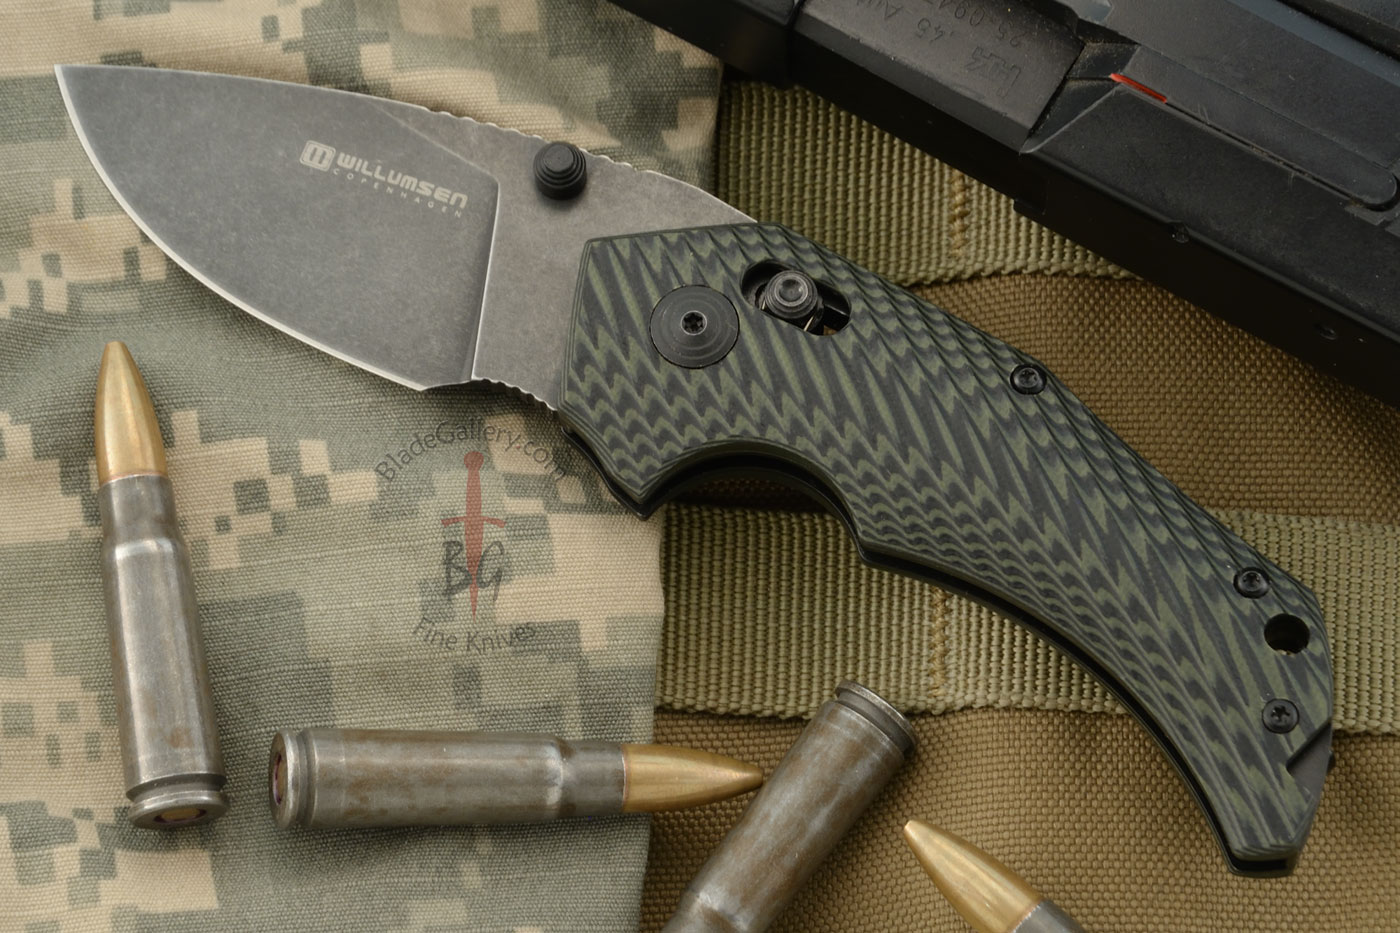 Red E AXIS Lock Folder with Black/Green G-10